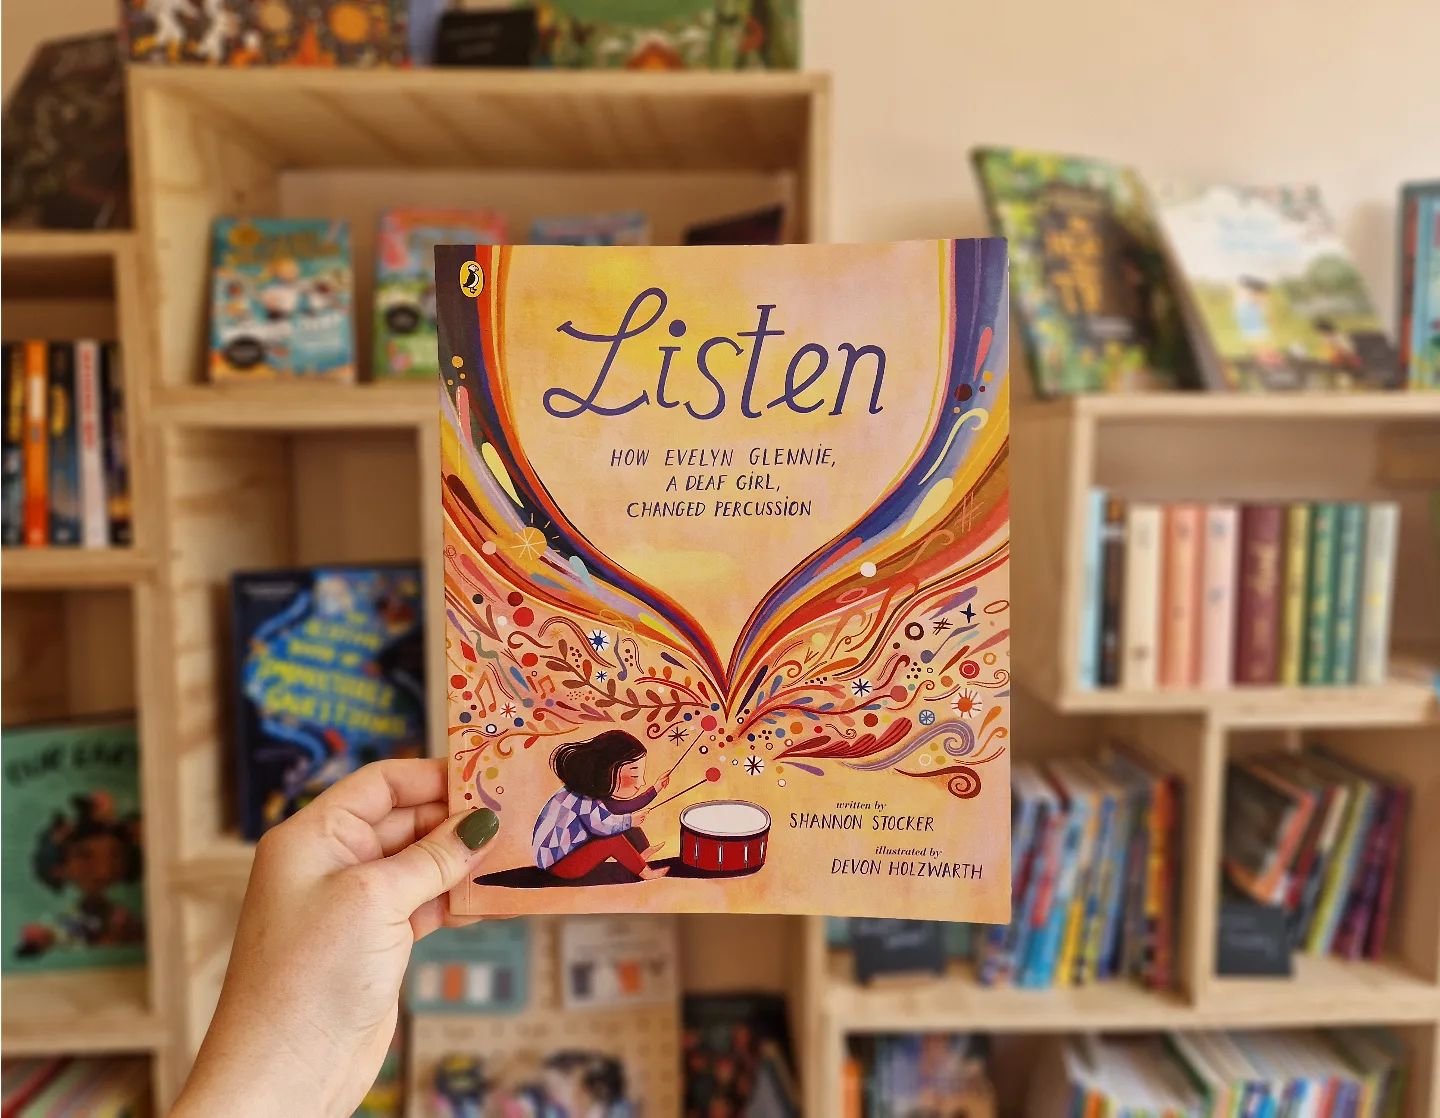 I'm sharing one of my favourite children's books for #deafawarenessweek - the story of Evelyn Glennie.

Evelyn has been profoundly deaf since the age of 12, but with a love and ability for music, the book follows Evelyn as she discovers that nothing 